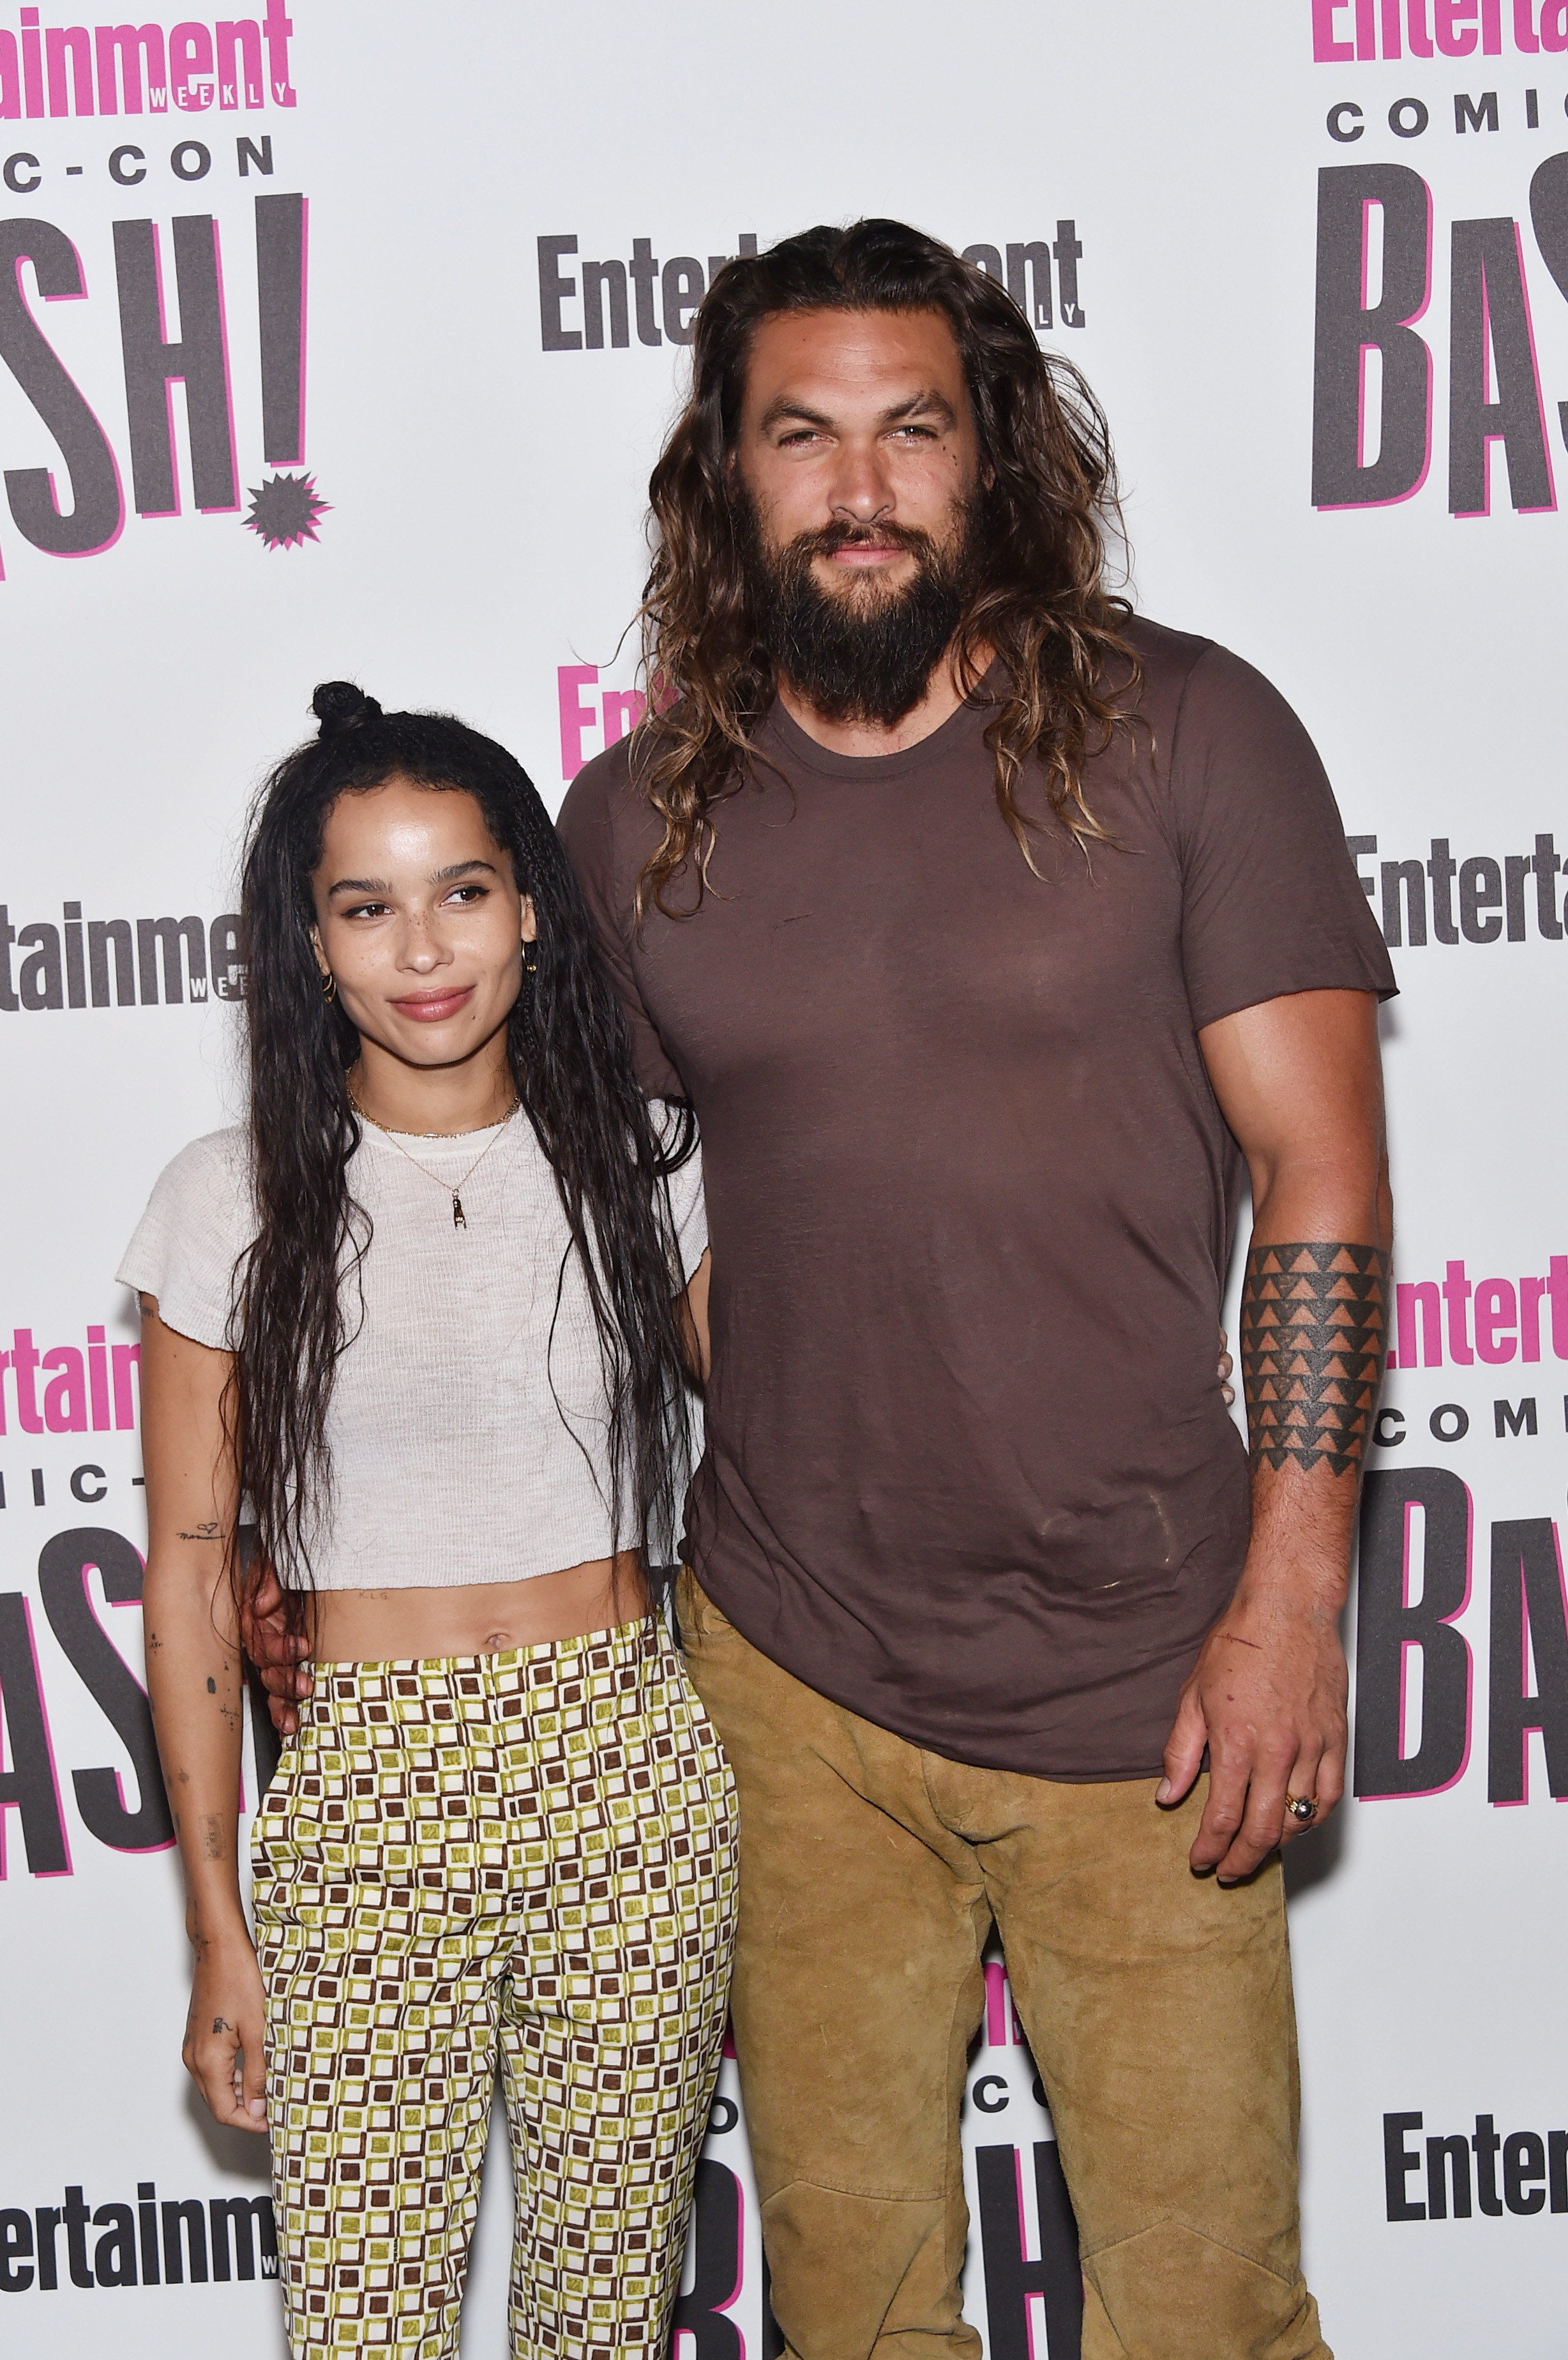 Zoe Kravitz and Jason Momoa dressed casually at an Entertainment Weekly event